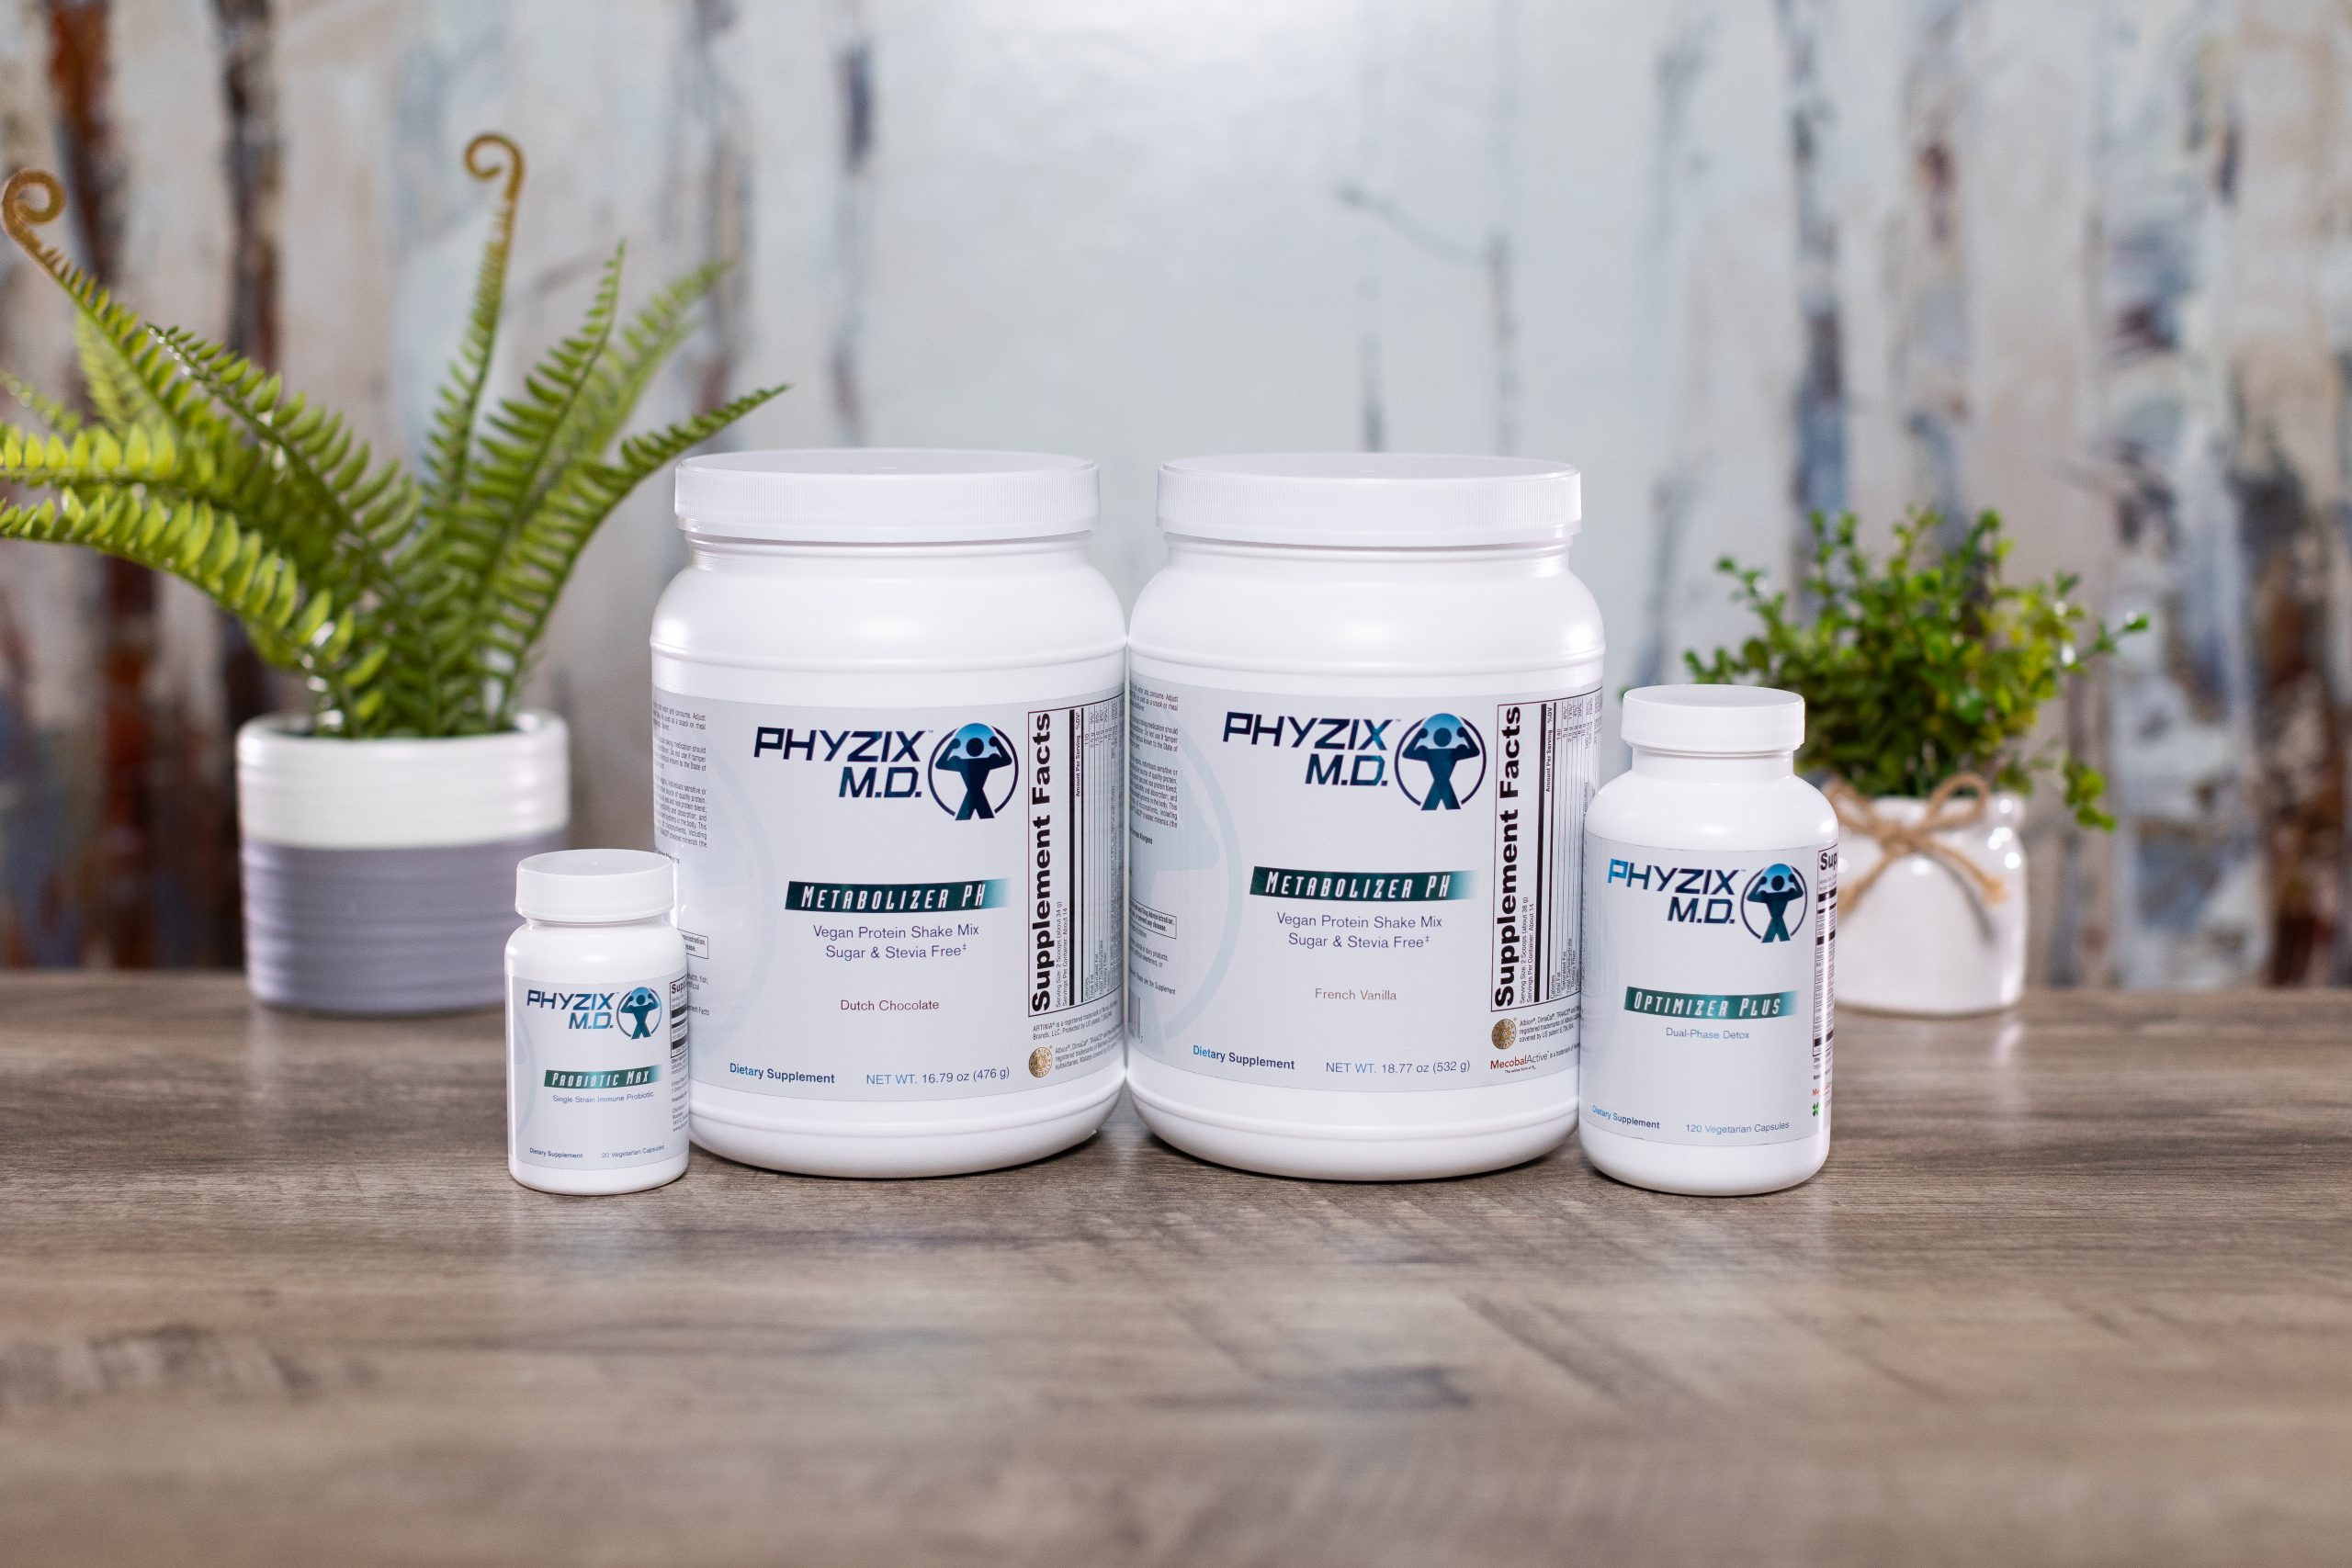 Phyzix MD cleanse